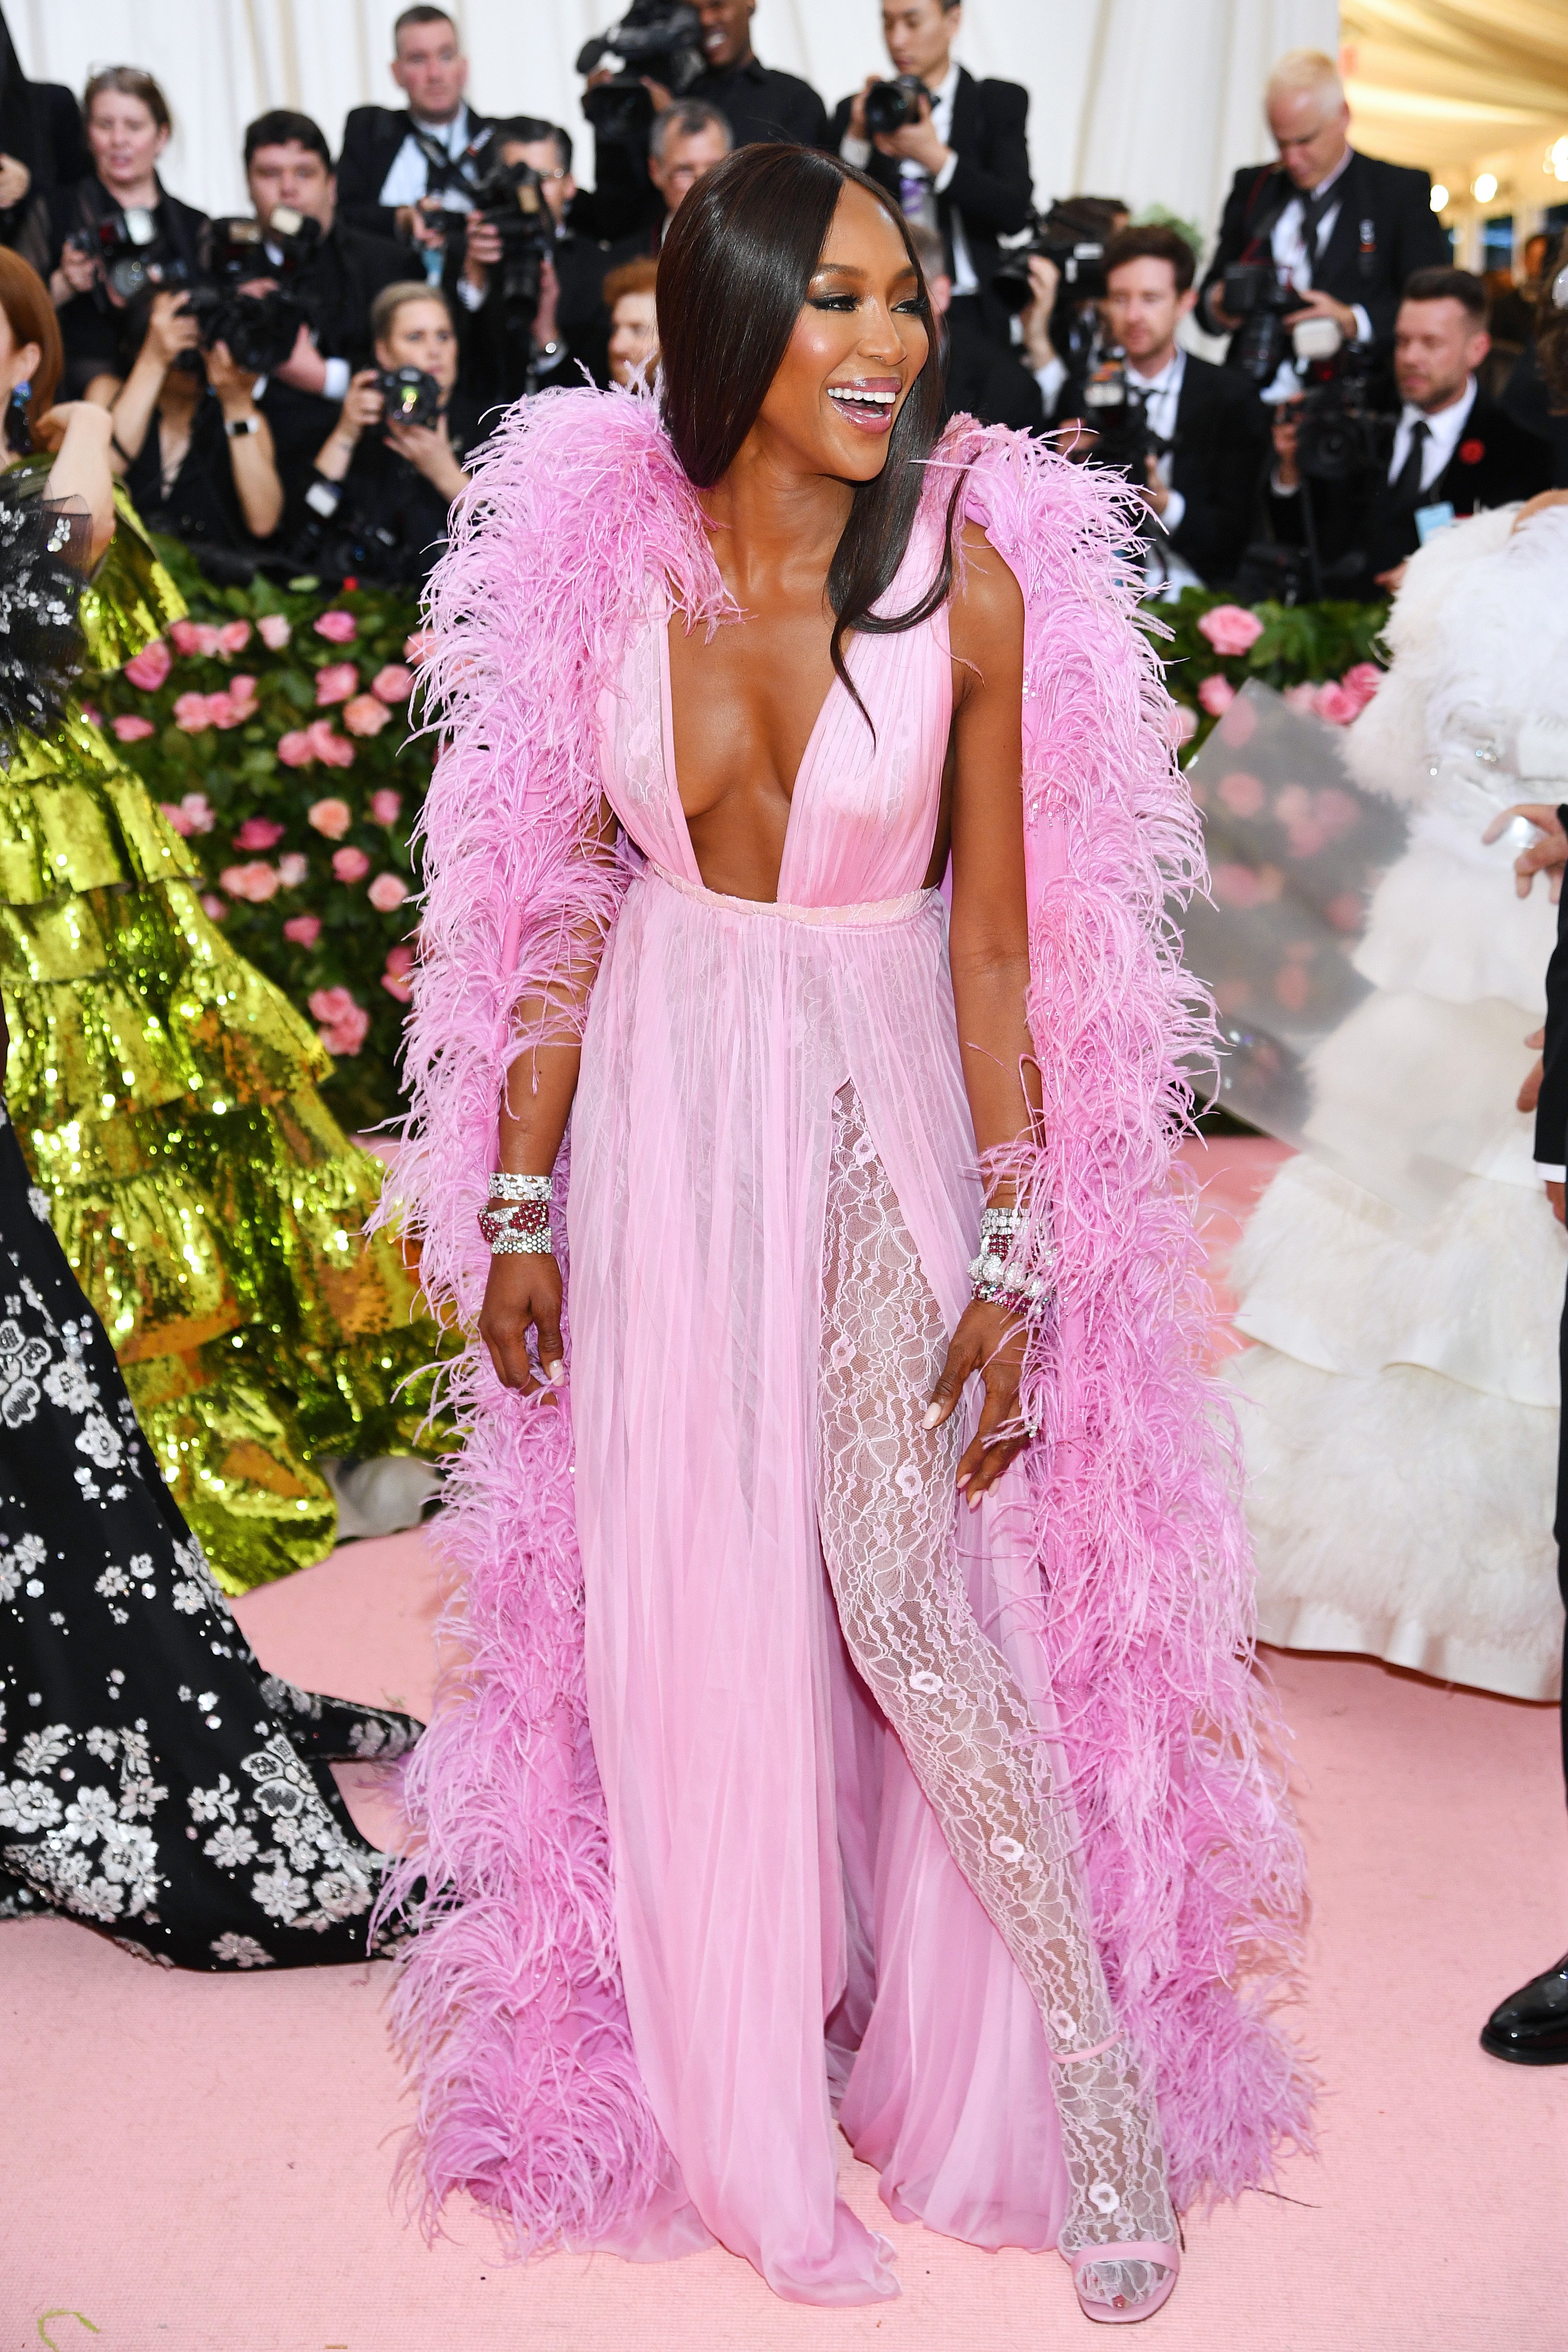 Naomi Campbell attends The 2019 Met Gala at Metropolitan Museum of Art on May 6, 2019 in New York City. | Source: Getty Images